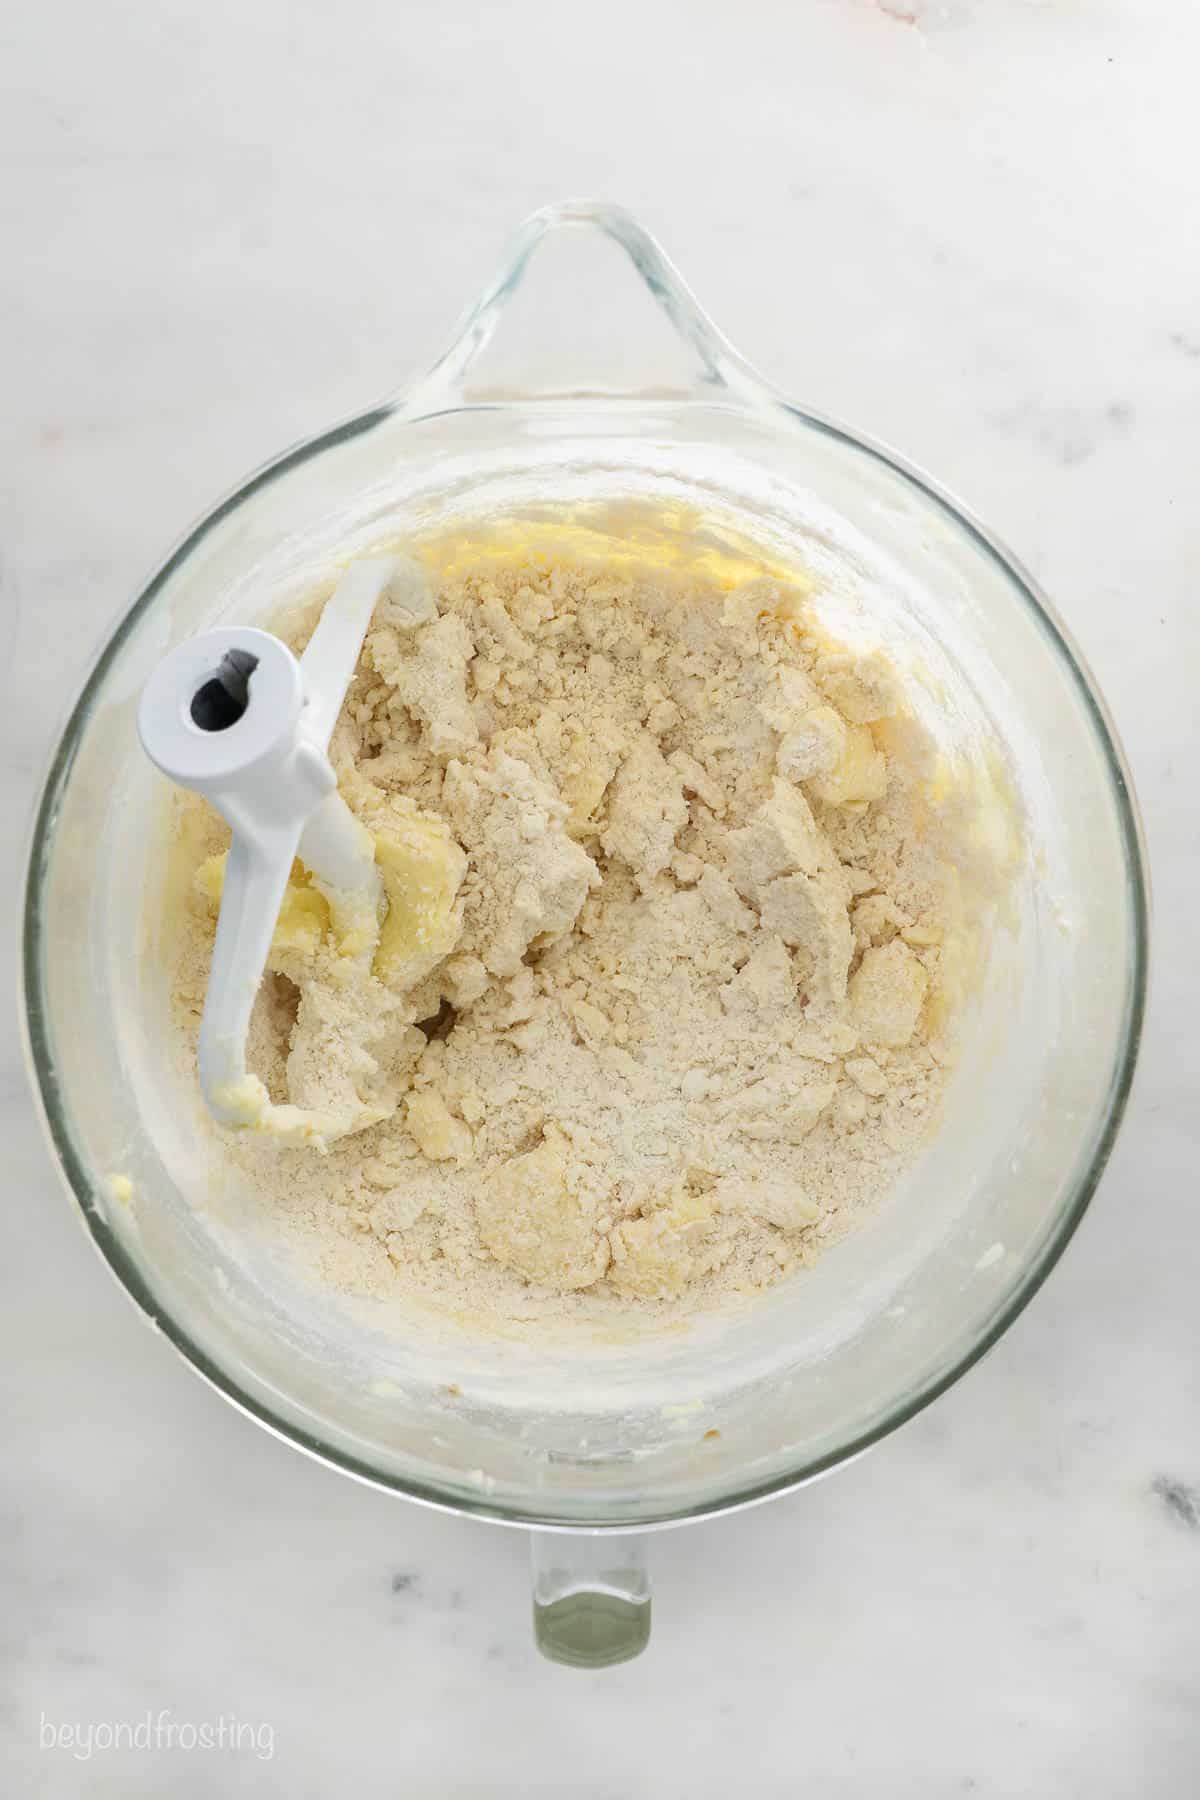 The in-progress cookie dough in a large glass beaker after the dry ingredients have been poured in